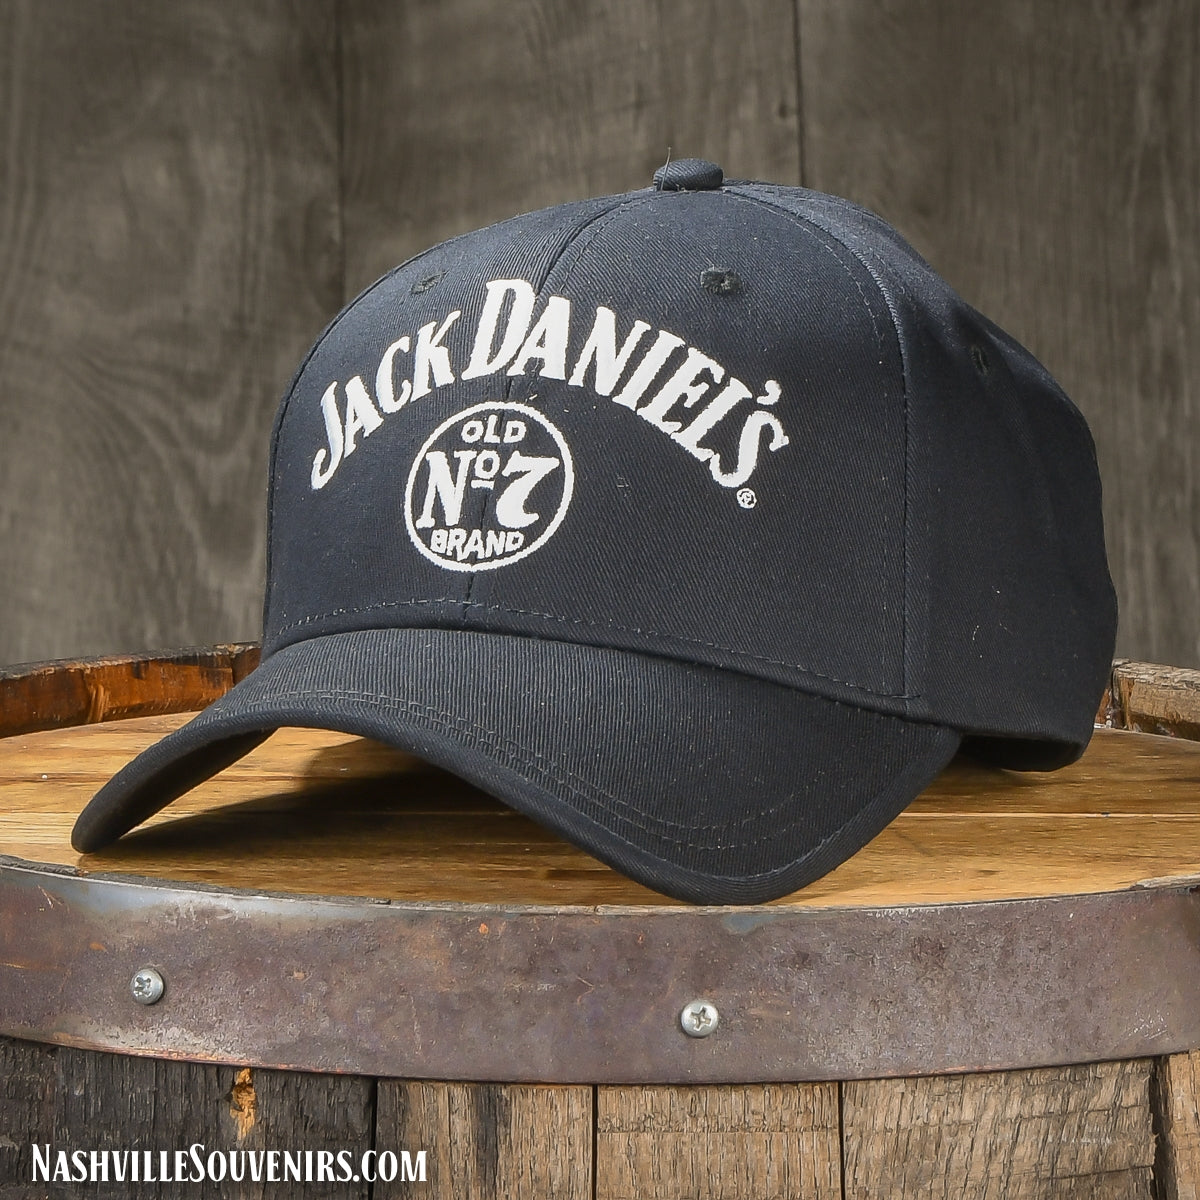 A perennial favorite and classic. Buy your Jack Daniels Black Old No. 7 Hat today and get FREE SHIPPING on U.S. orders over $75!